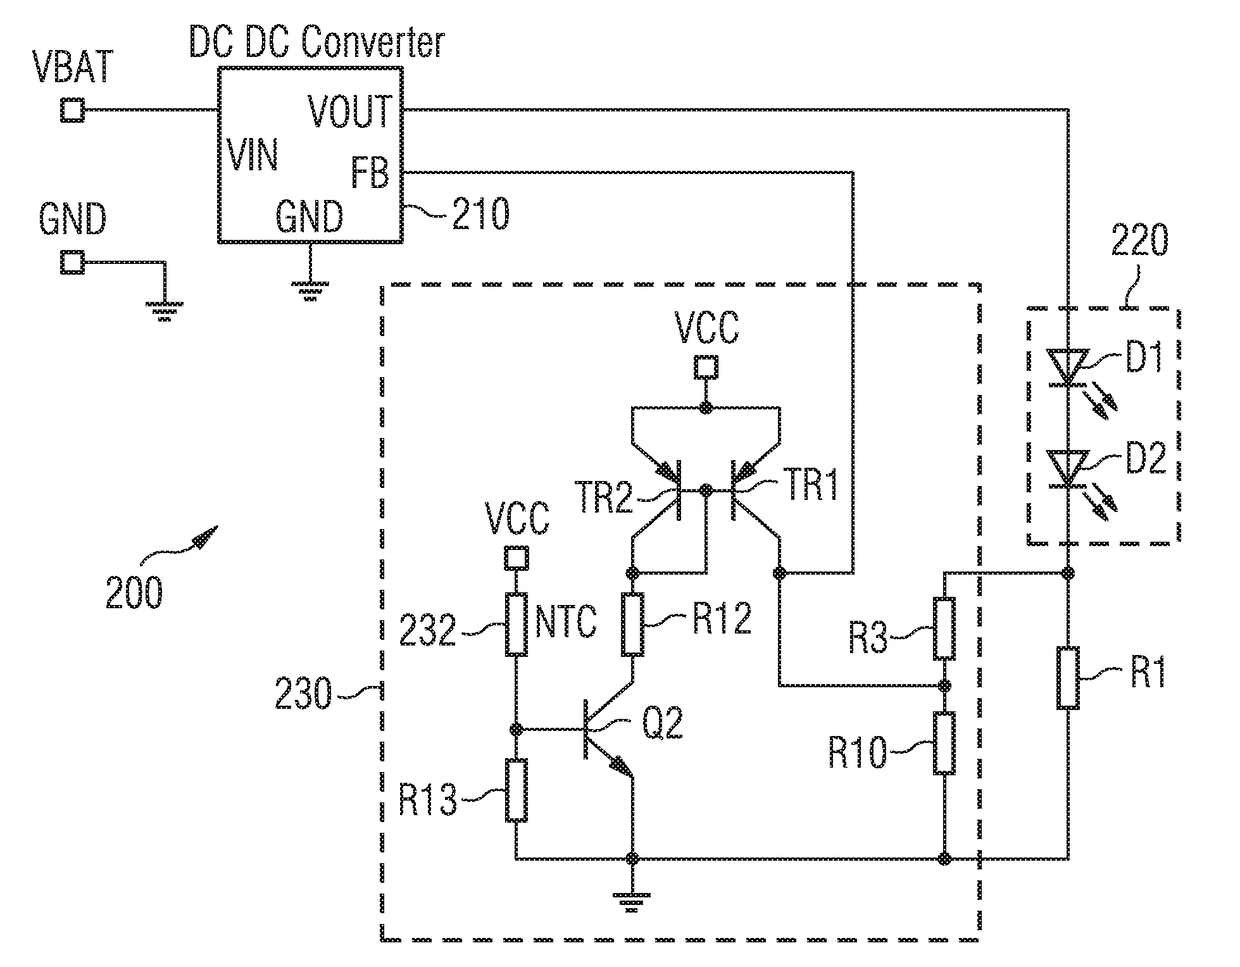 A thermal management and power supply control system for at least one light source